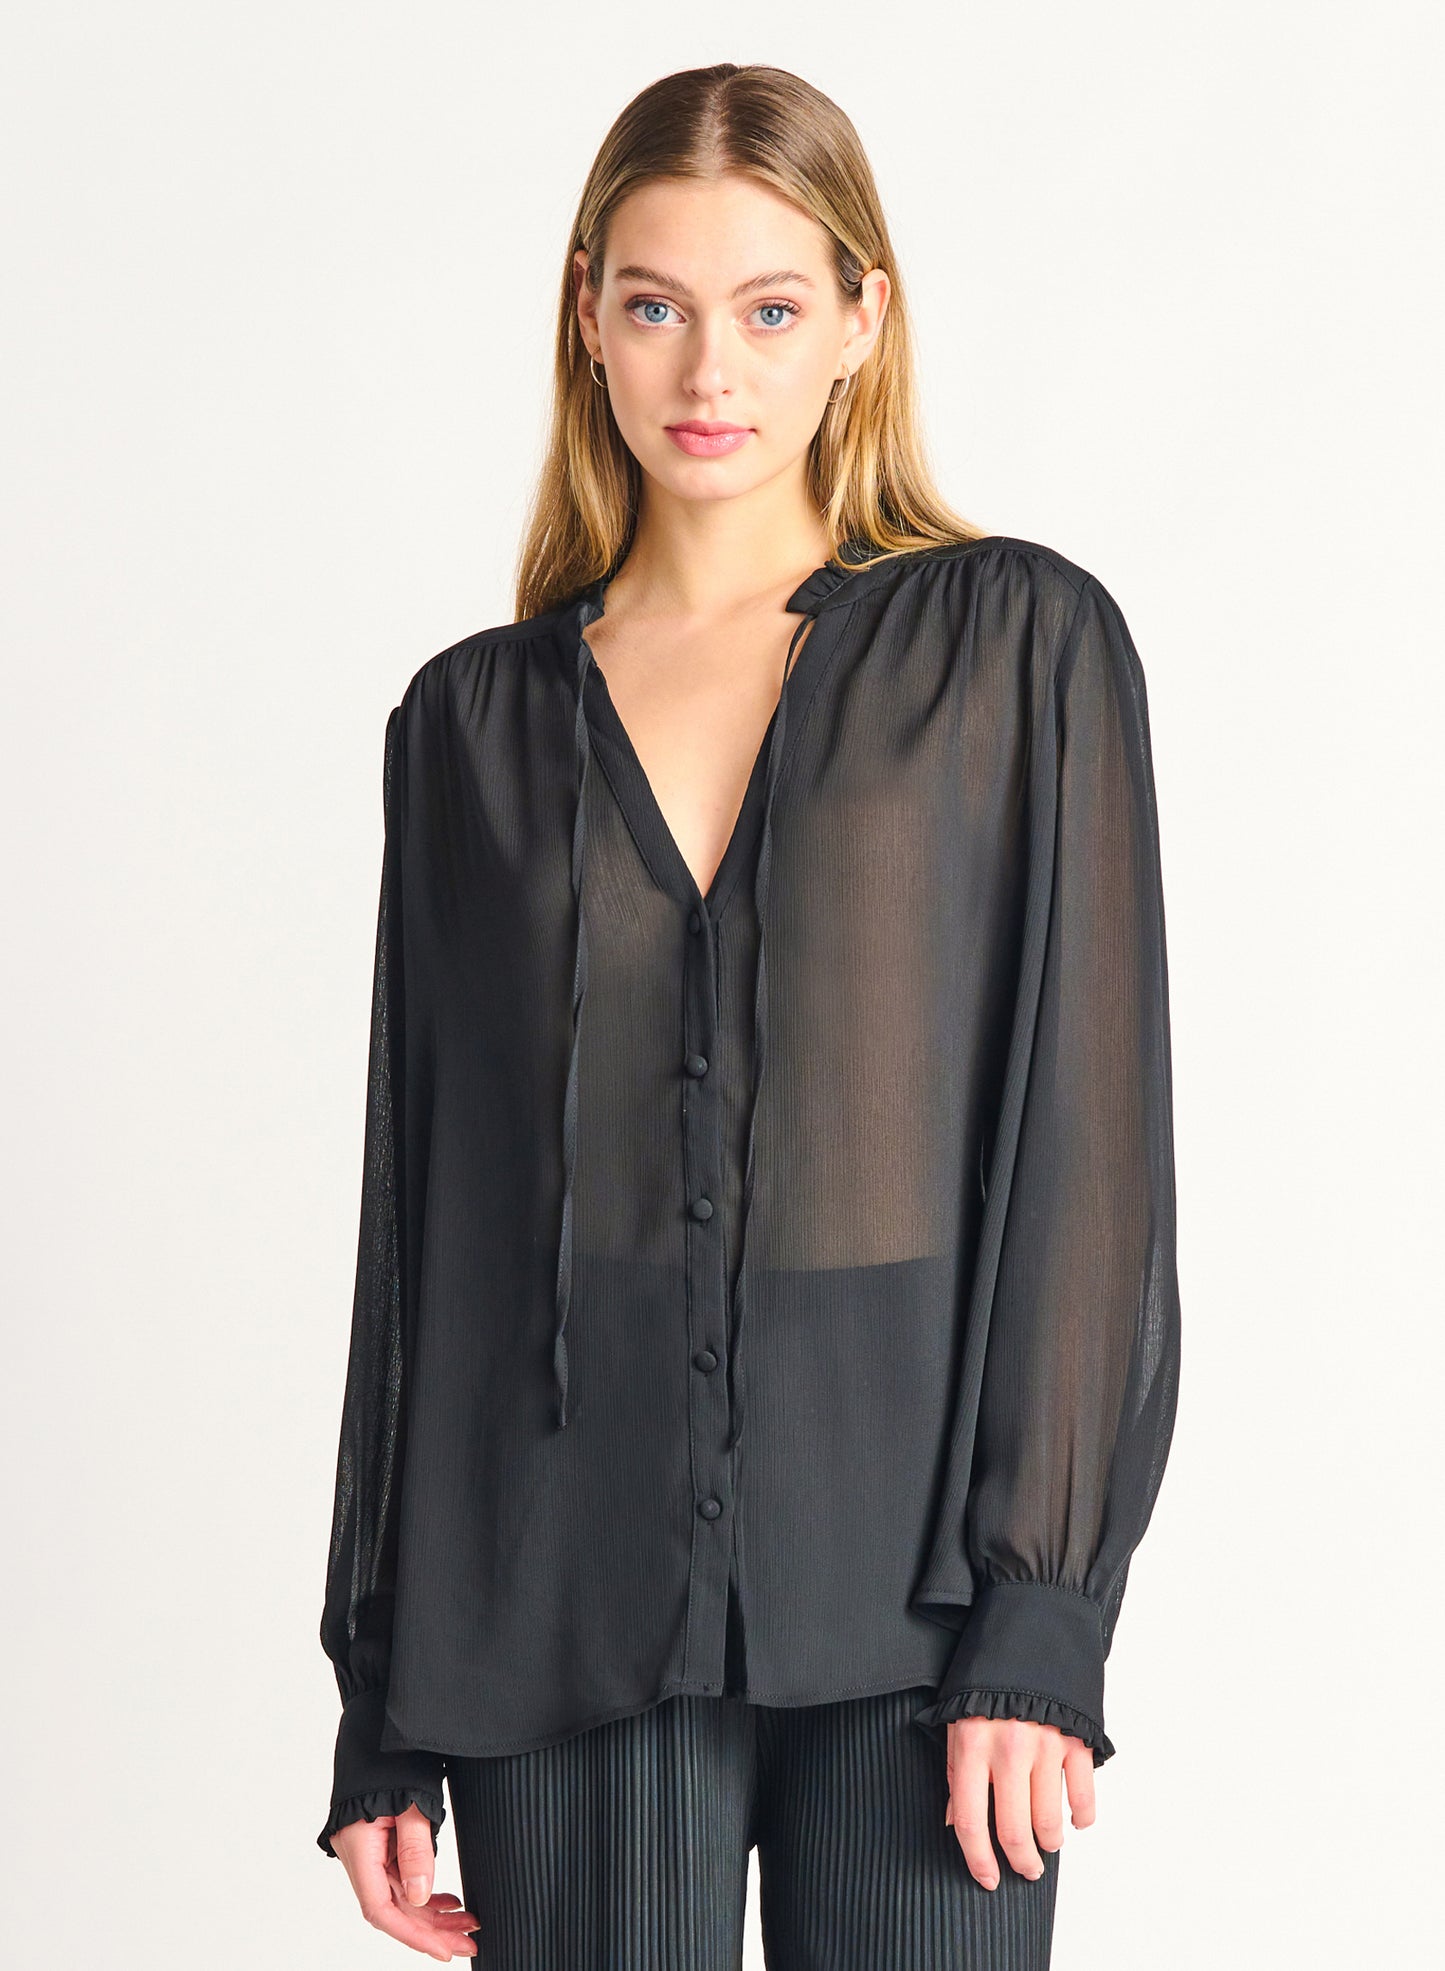 Ruffle Tie-Front Peasant Blouse